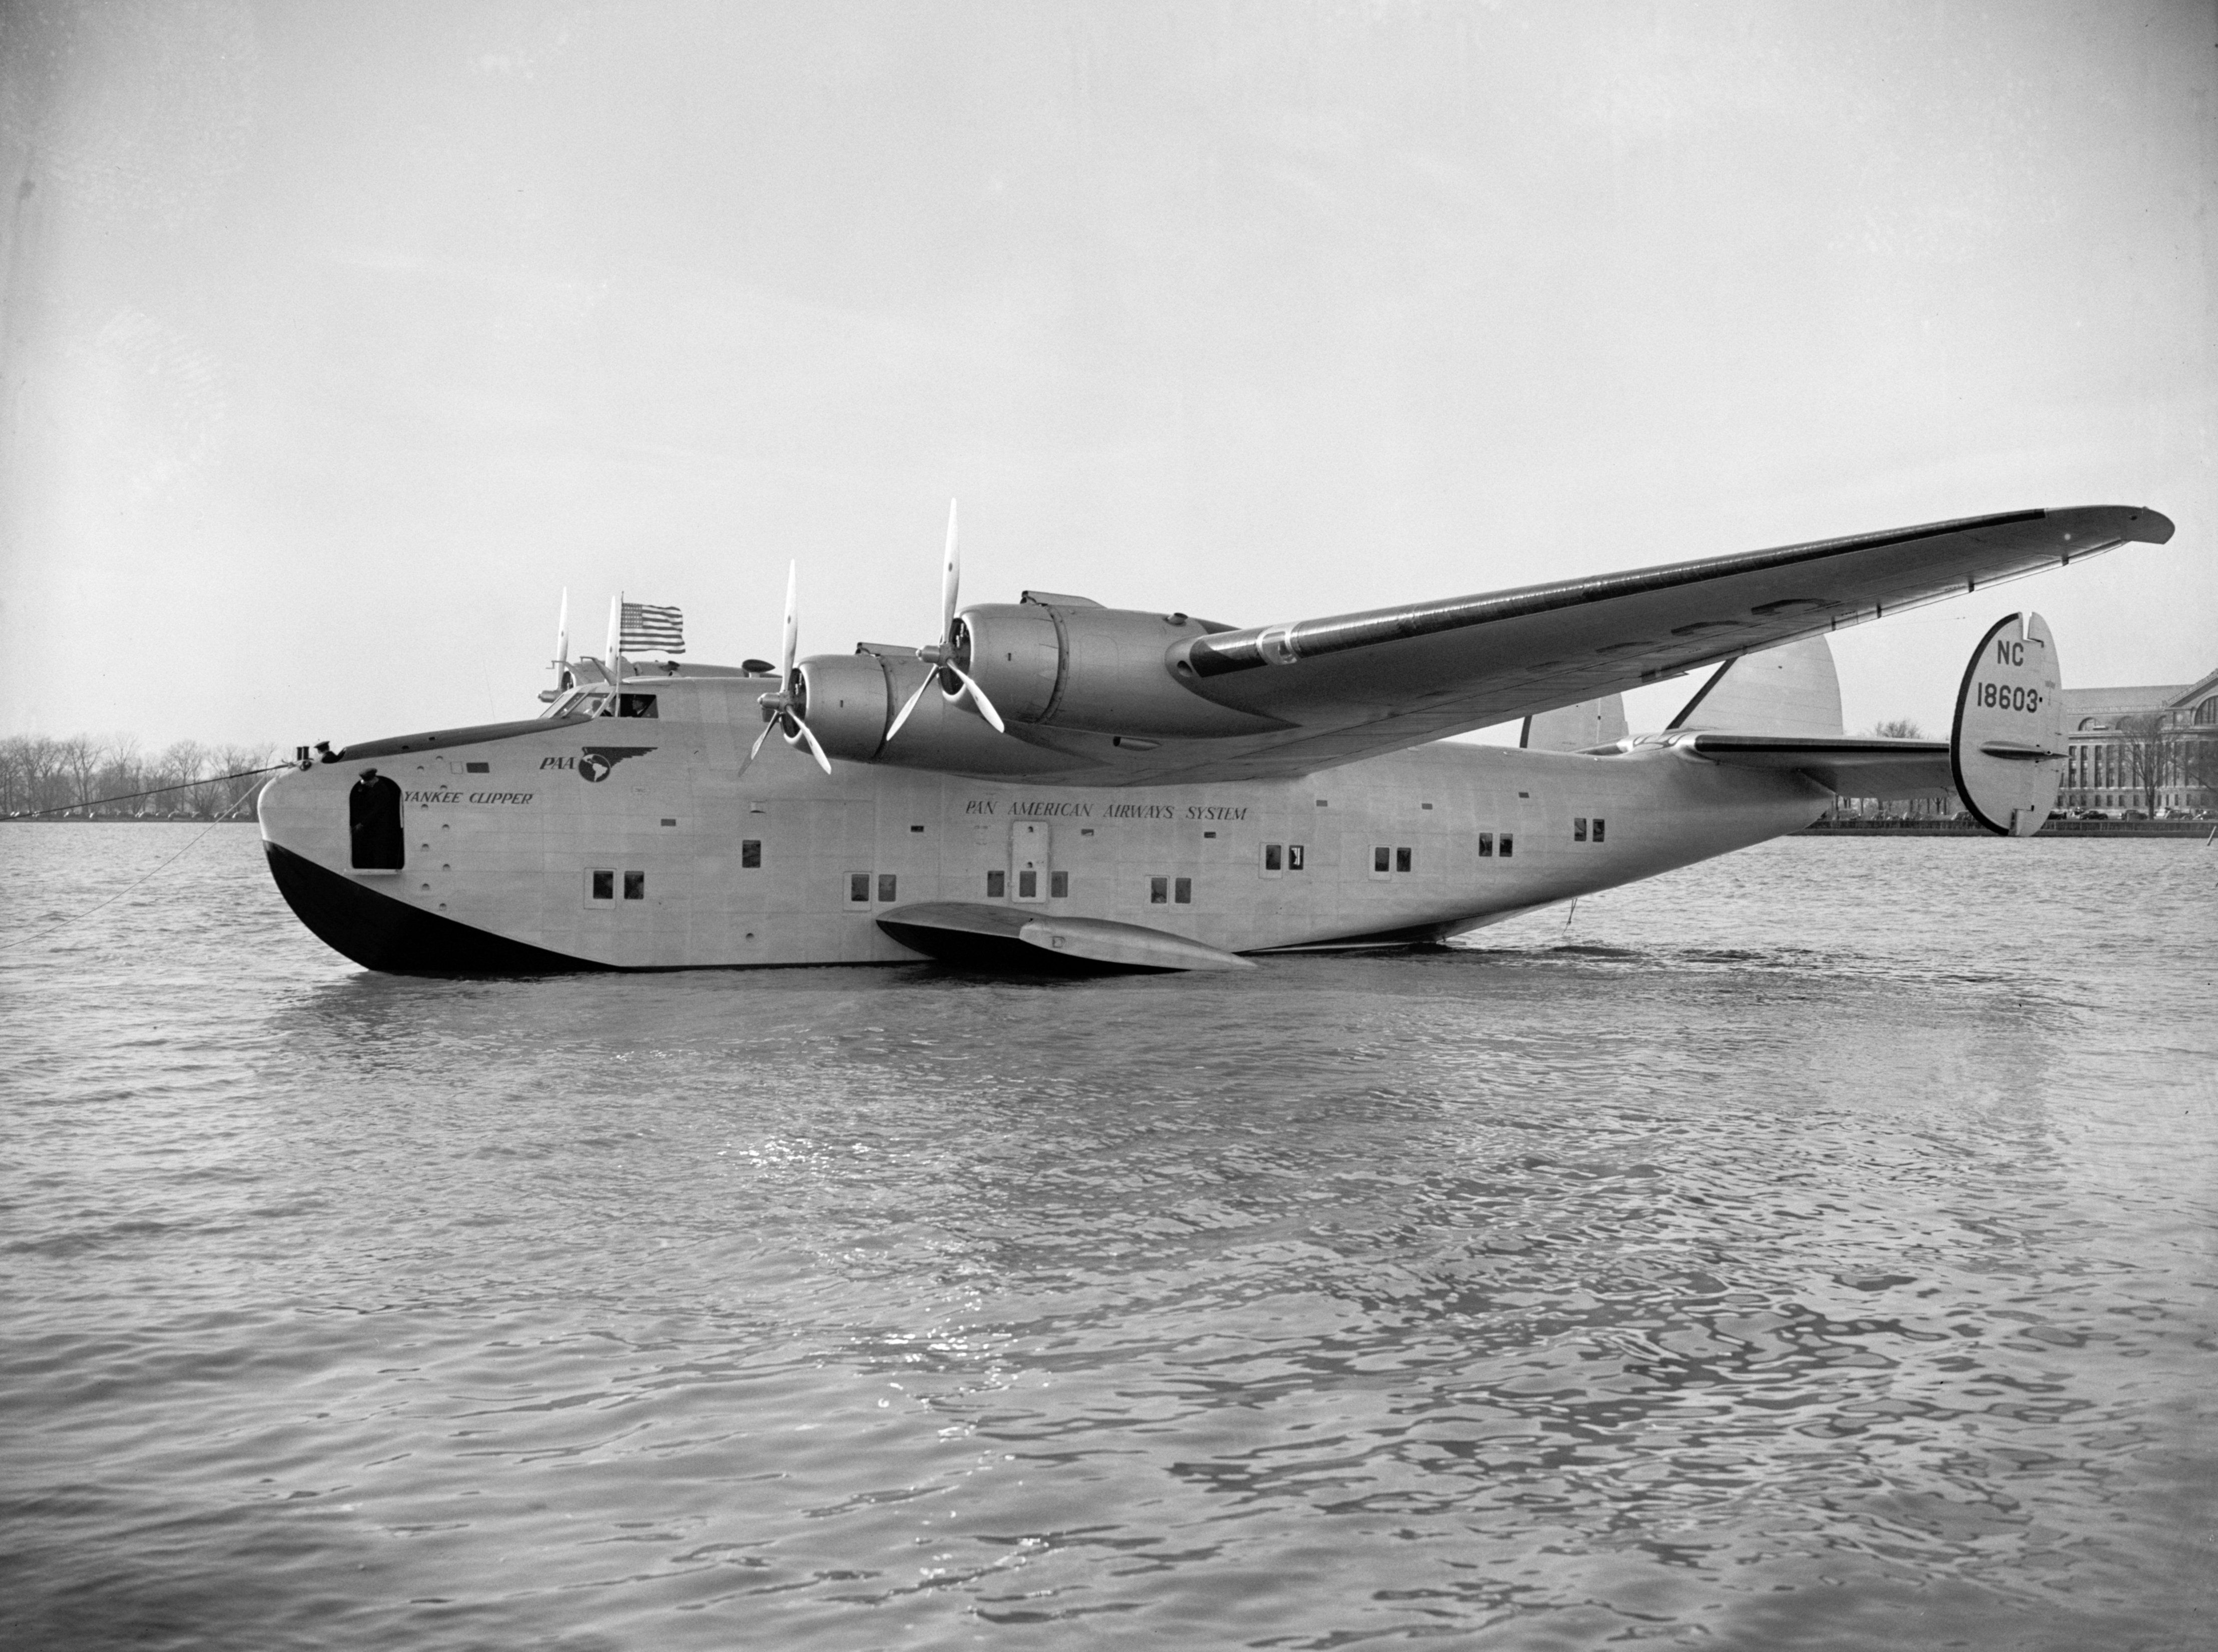 A Boeing 314 named the Yankee Clipper parked in a body of water.